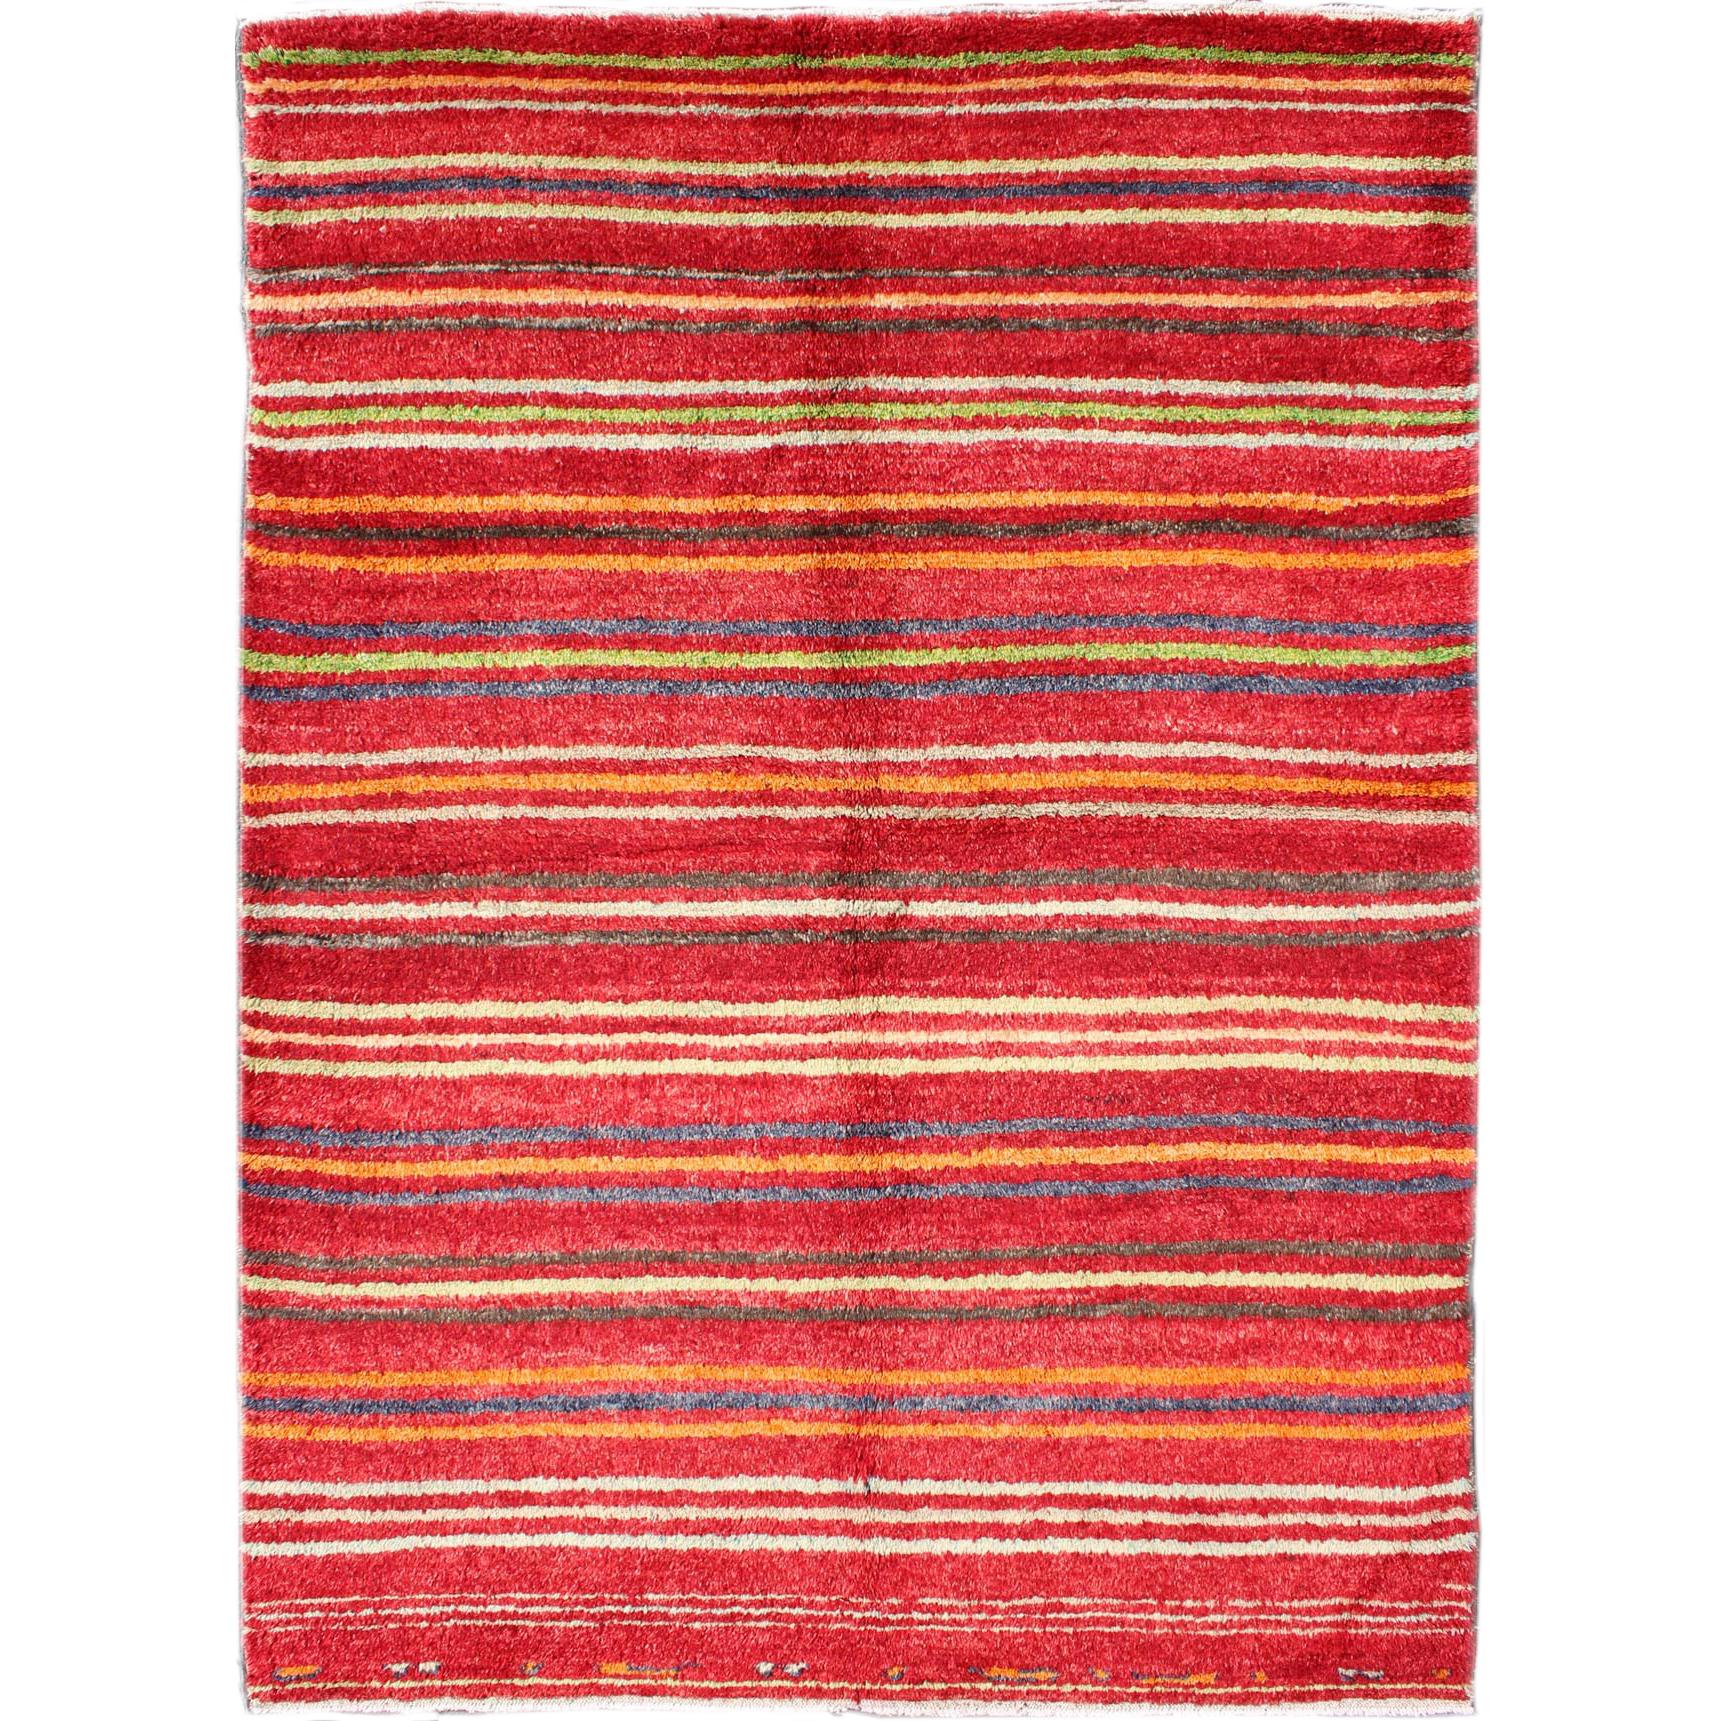 Turkish Tulu Carpet with Colorful Striped Pattern in Red, Orange, Blue, Green For Sale